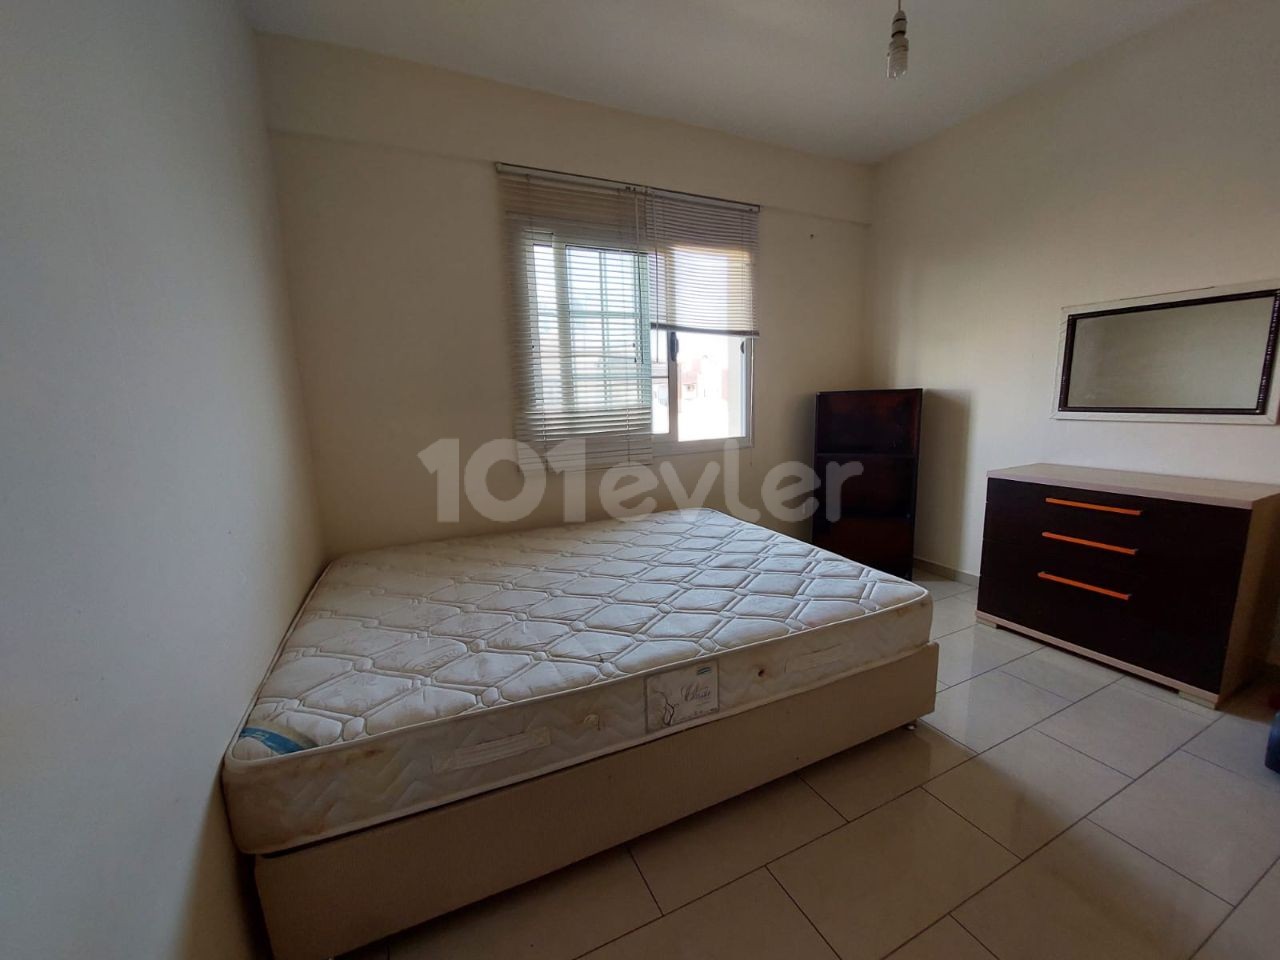 2+1 Apartment for Rent for Female Students in Gonyeli, 2 minutes walking distance from the bus station